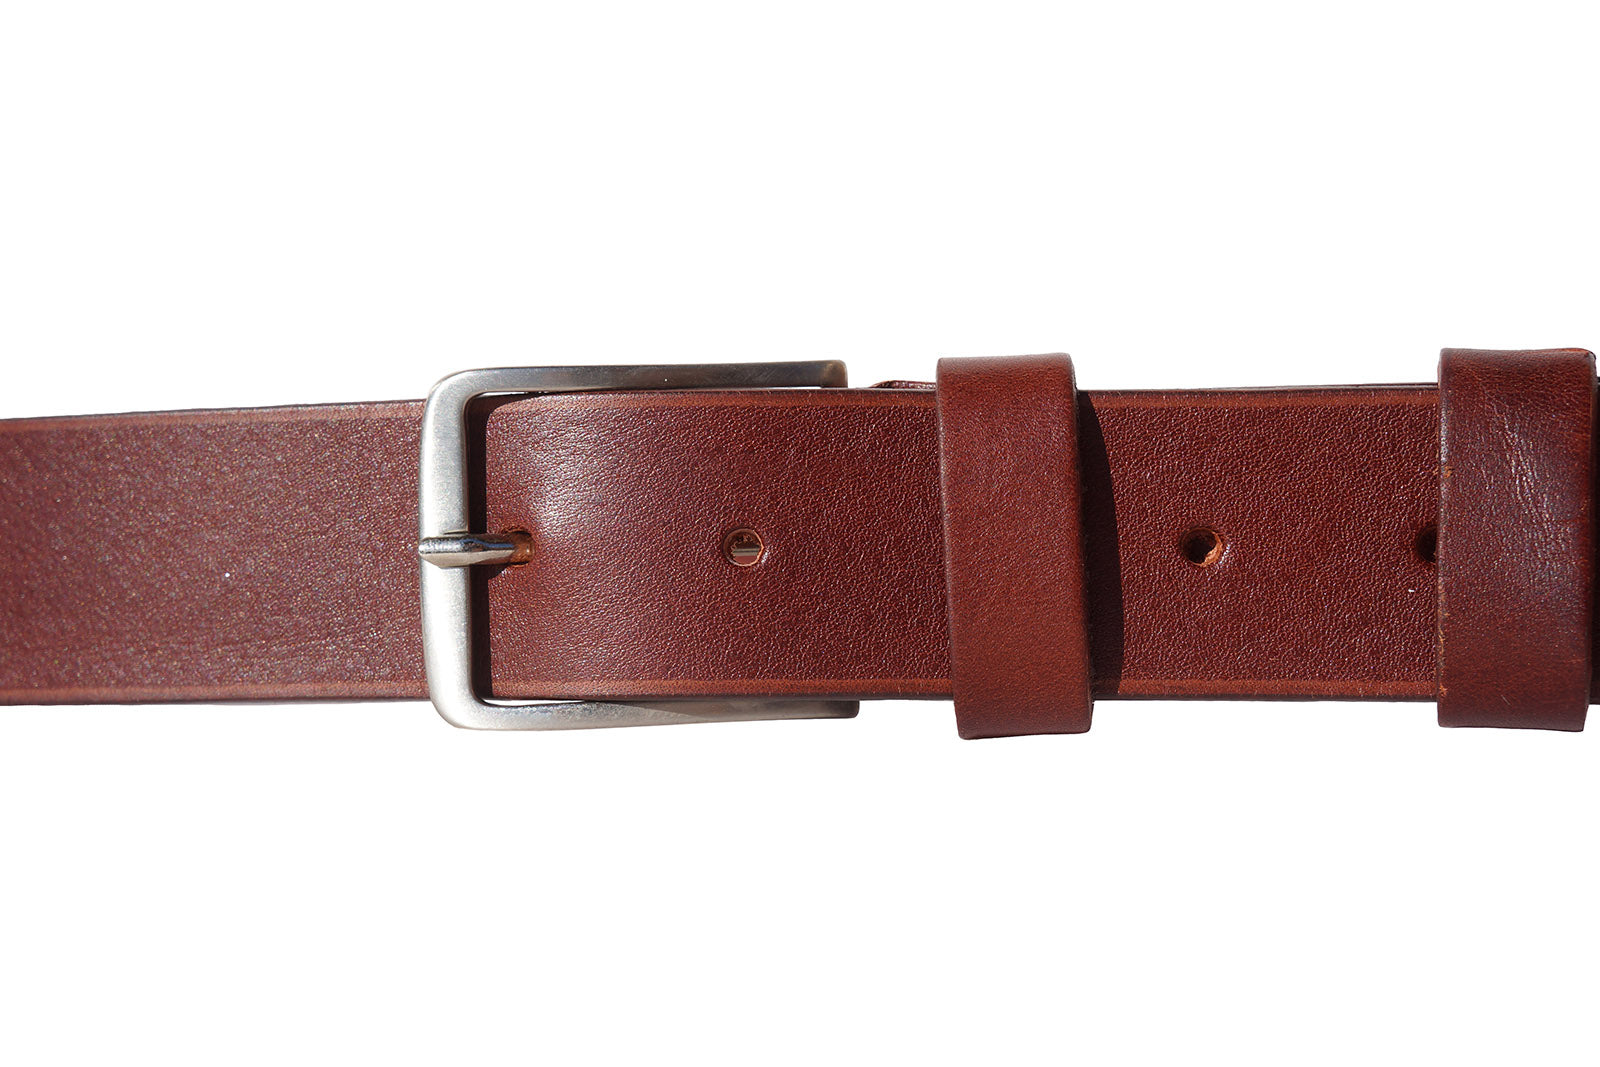 A close up of the belt showing the brown color option